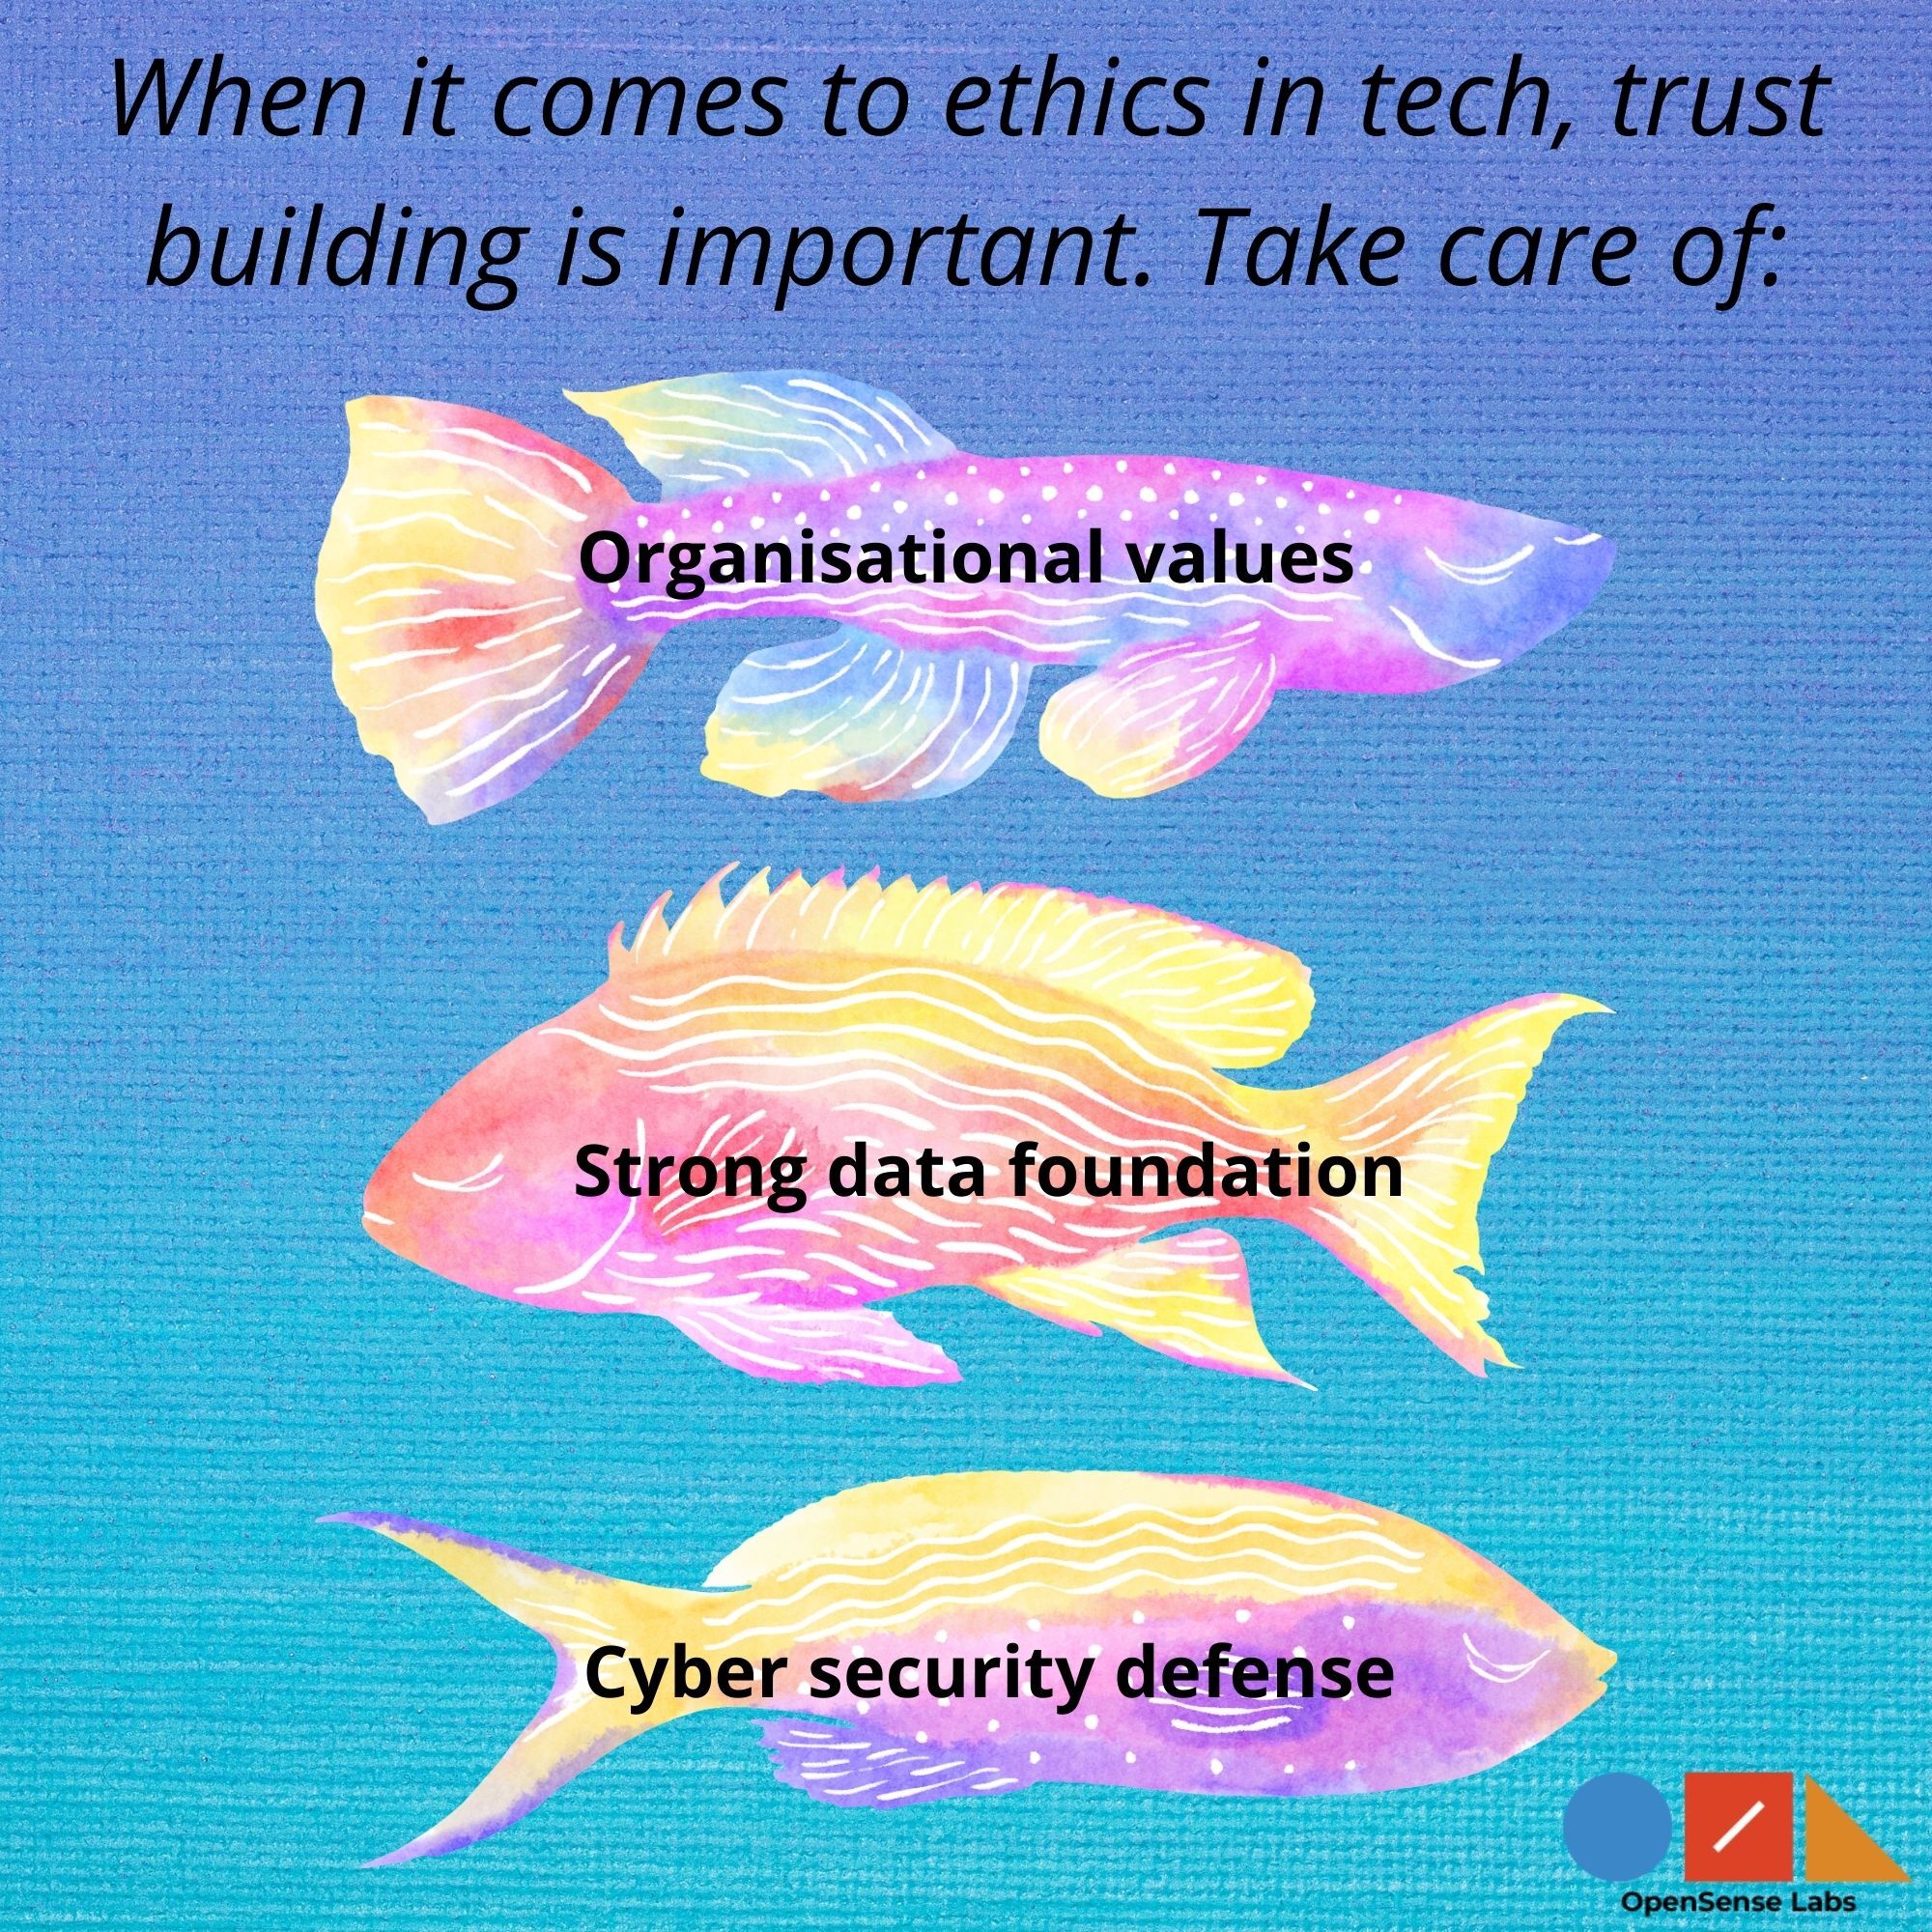 Illustration diagram describing the relationship between ethical technology and trust